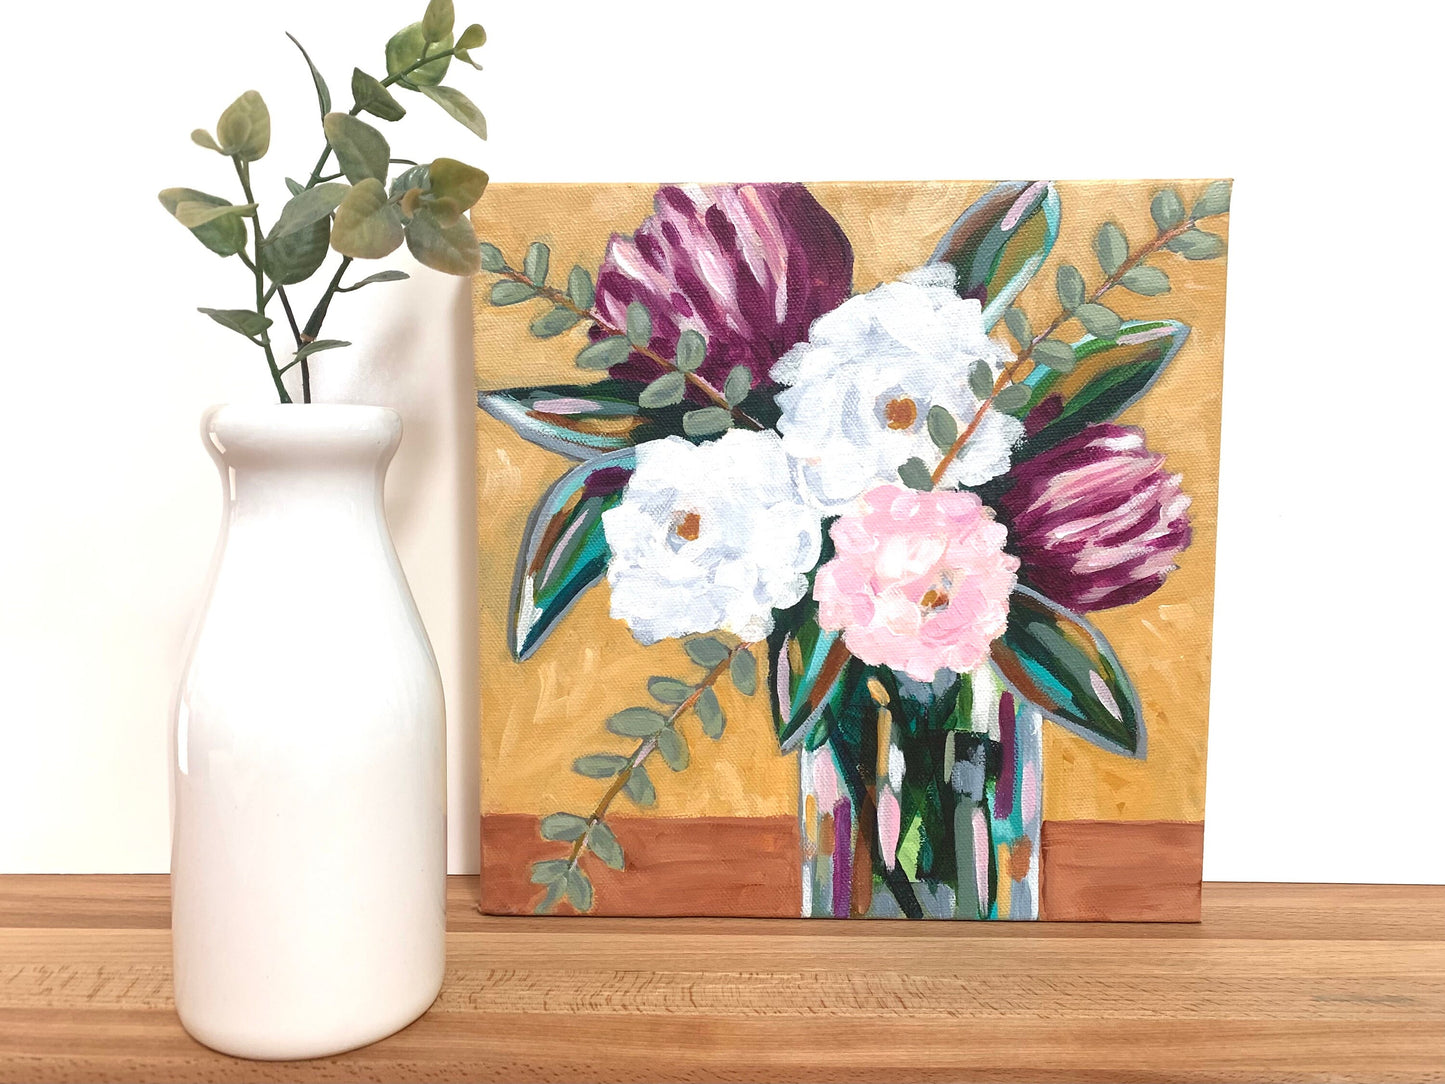 Violet and Mustard Floral Painting flower bouquet Vibrant painting Eye catching color Botanical design Nature home accent Garden decor